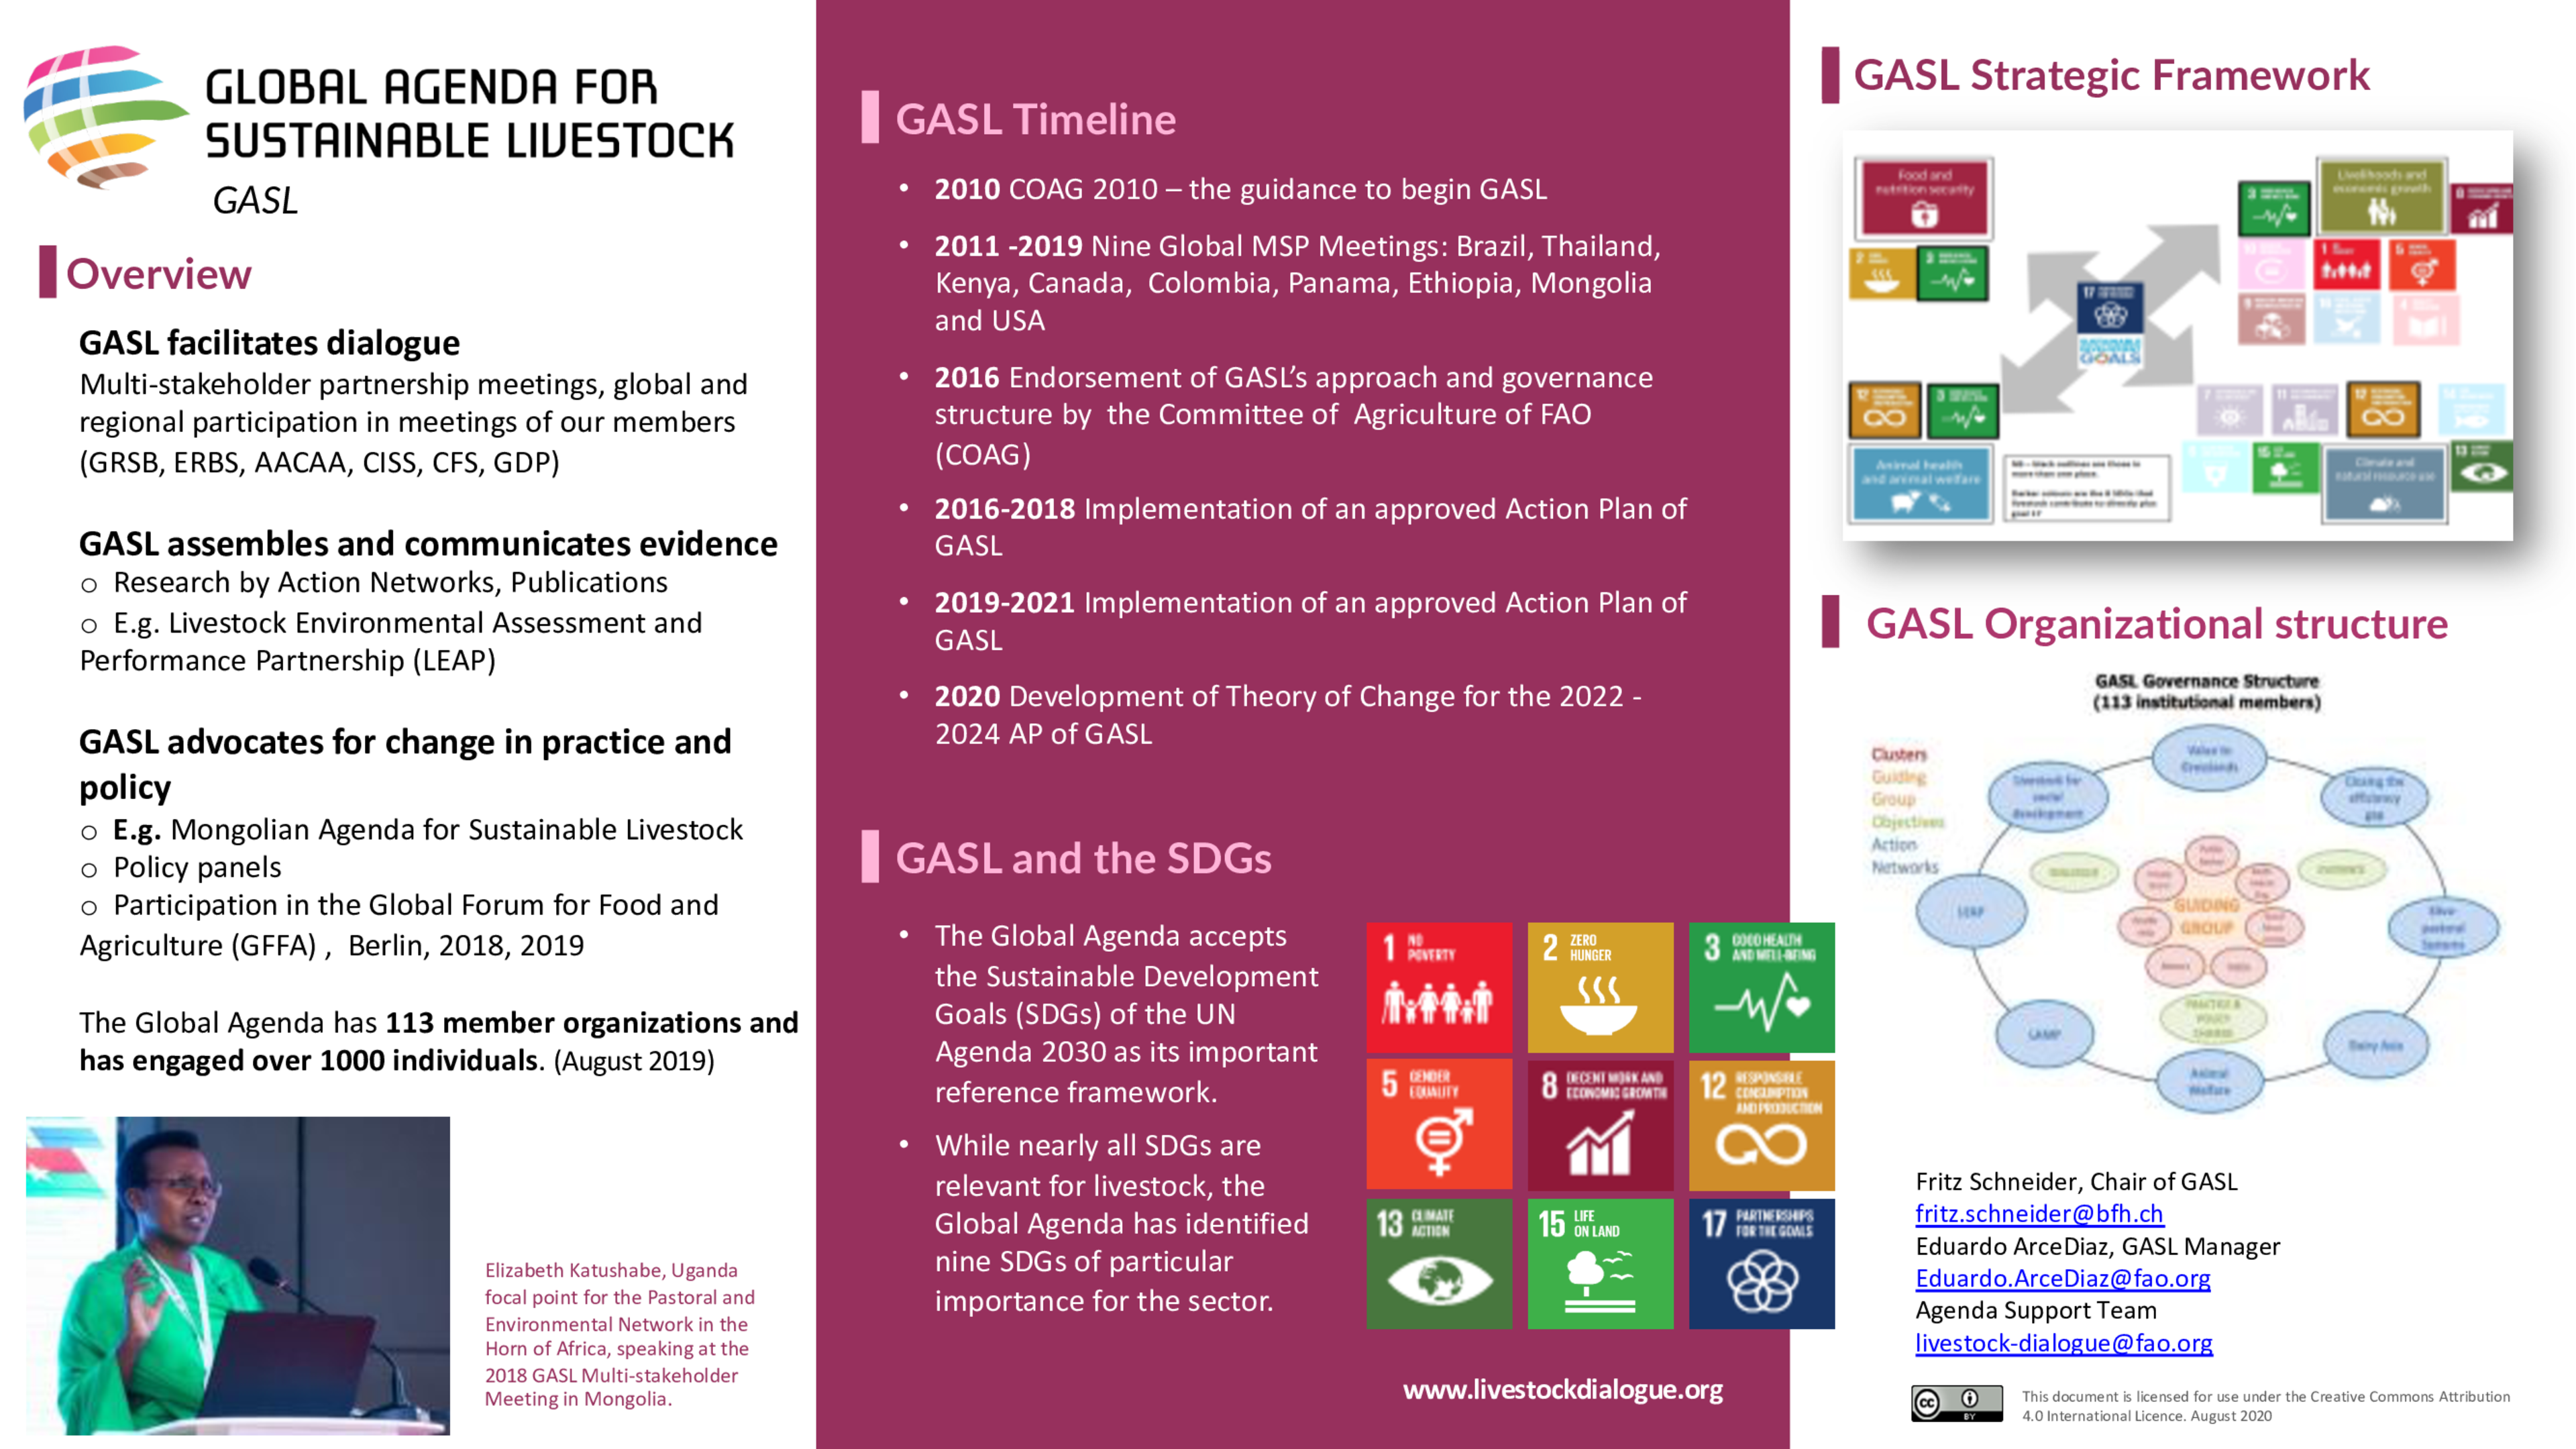 Overview of the Global Agenda for Sustainable Livestock